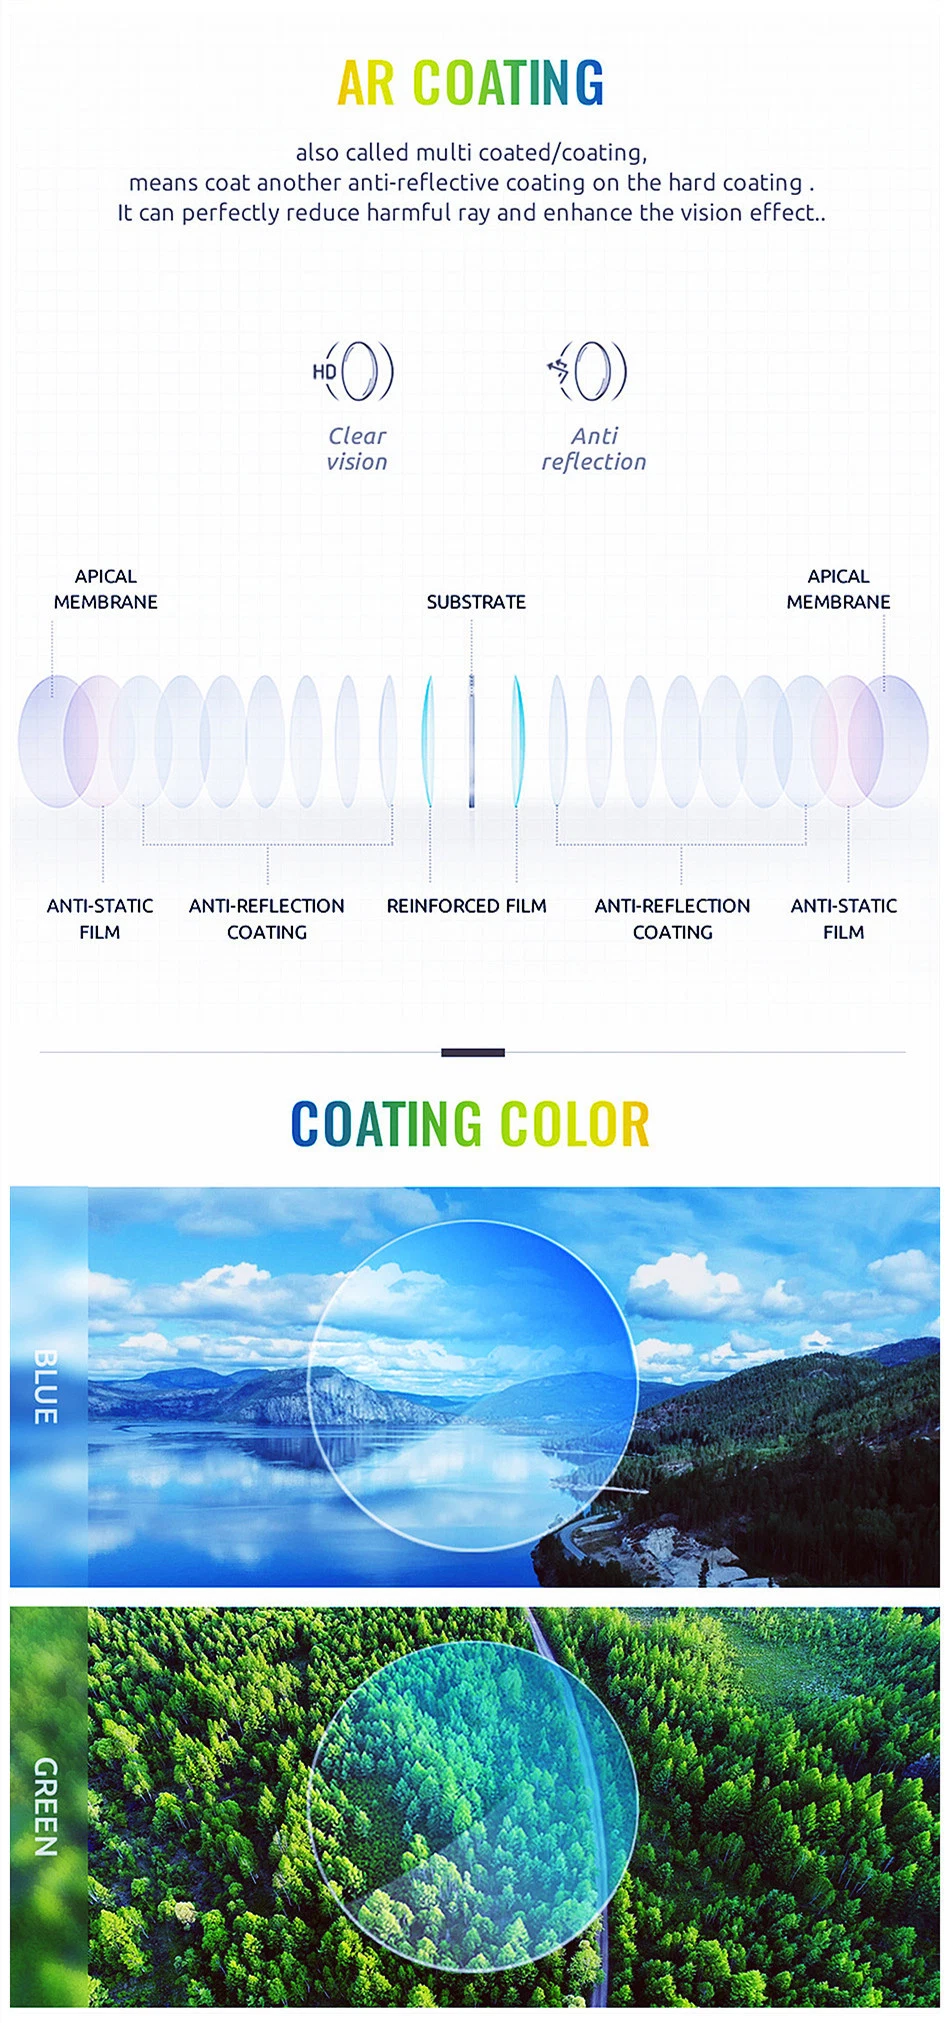 Fast Change Photochromic 1.59 Spin Polycarbonate Photochromic Hmc Polycarbonate Eyeglass Lenses